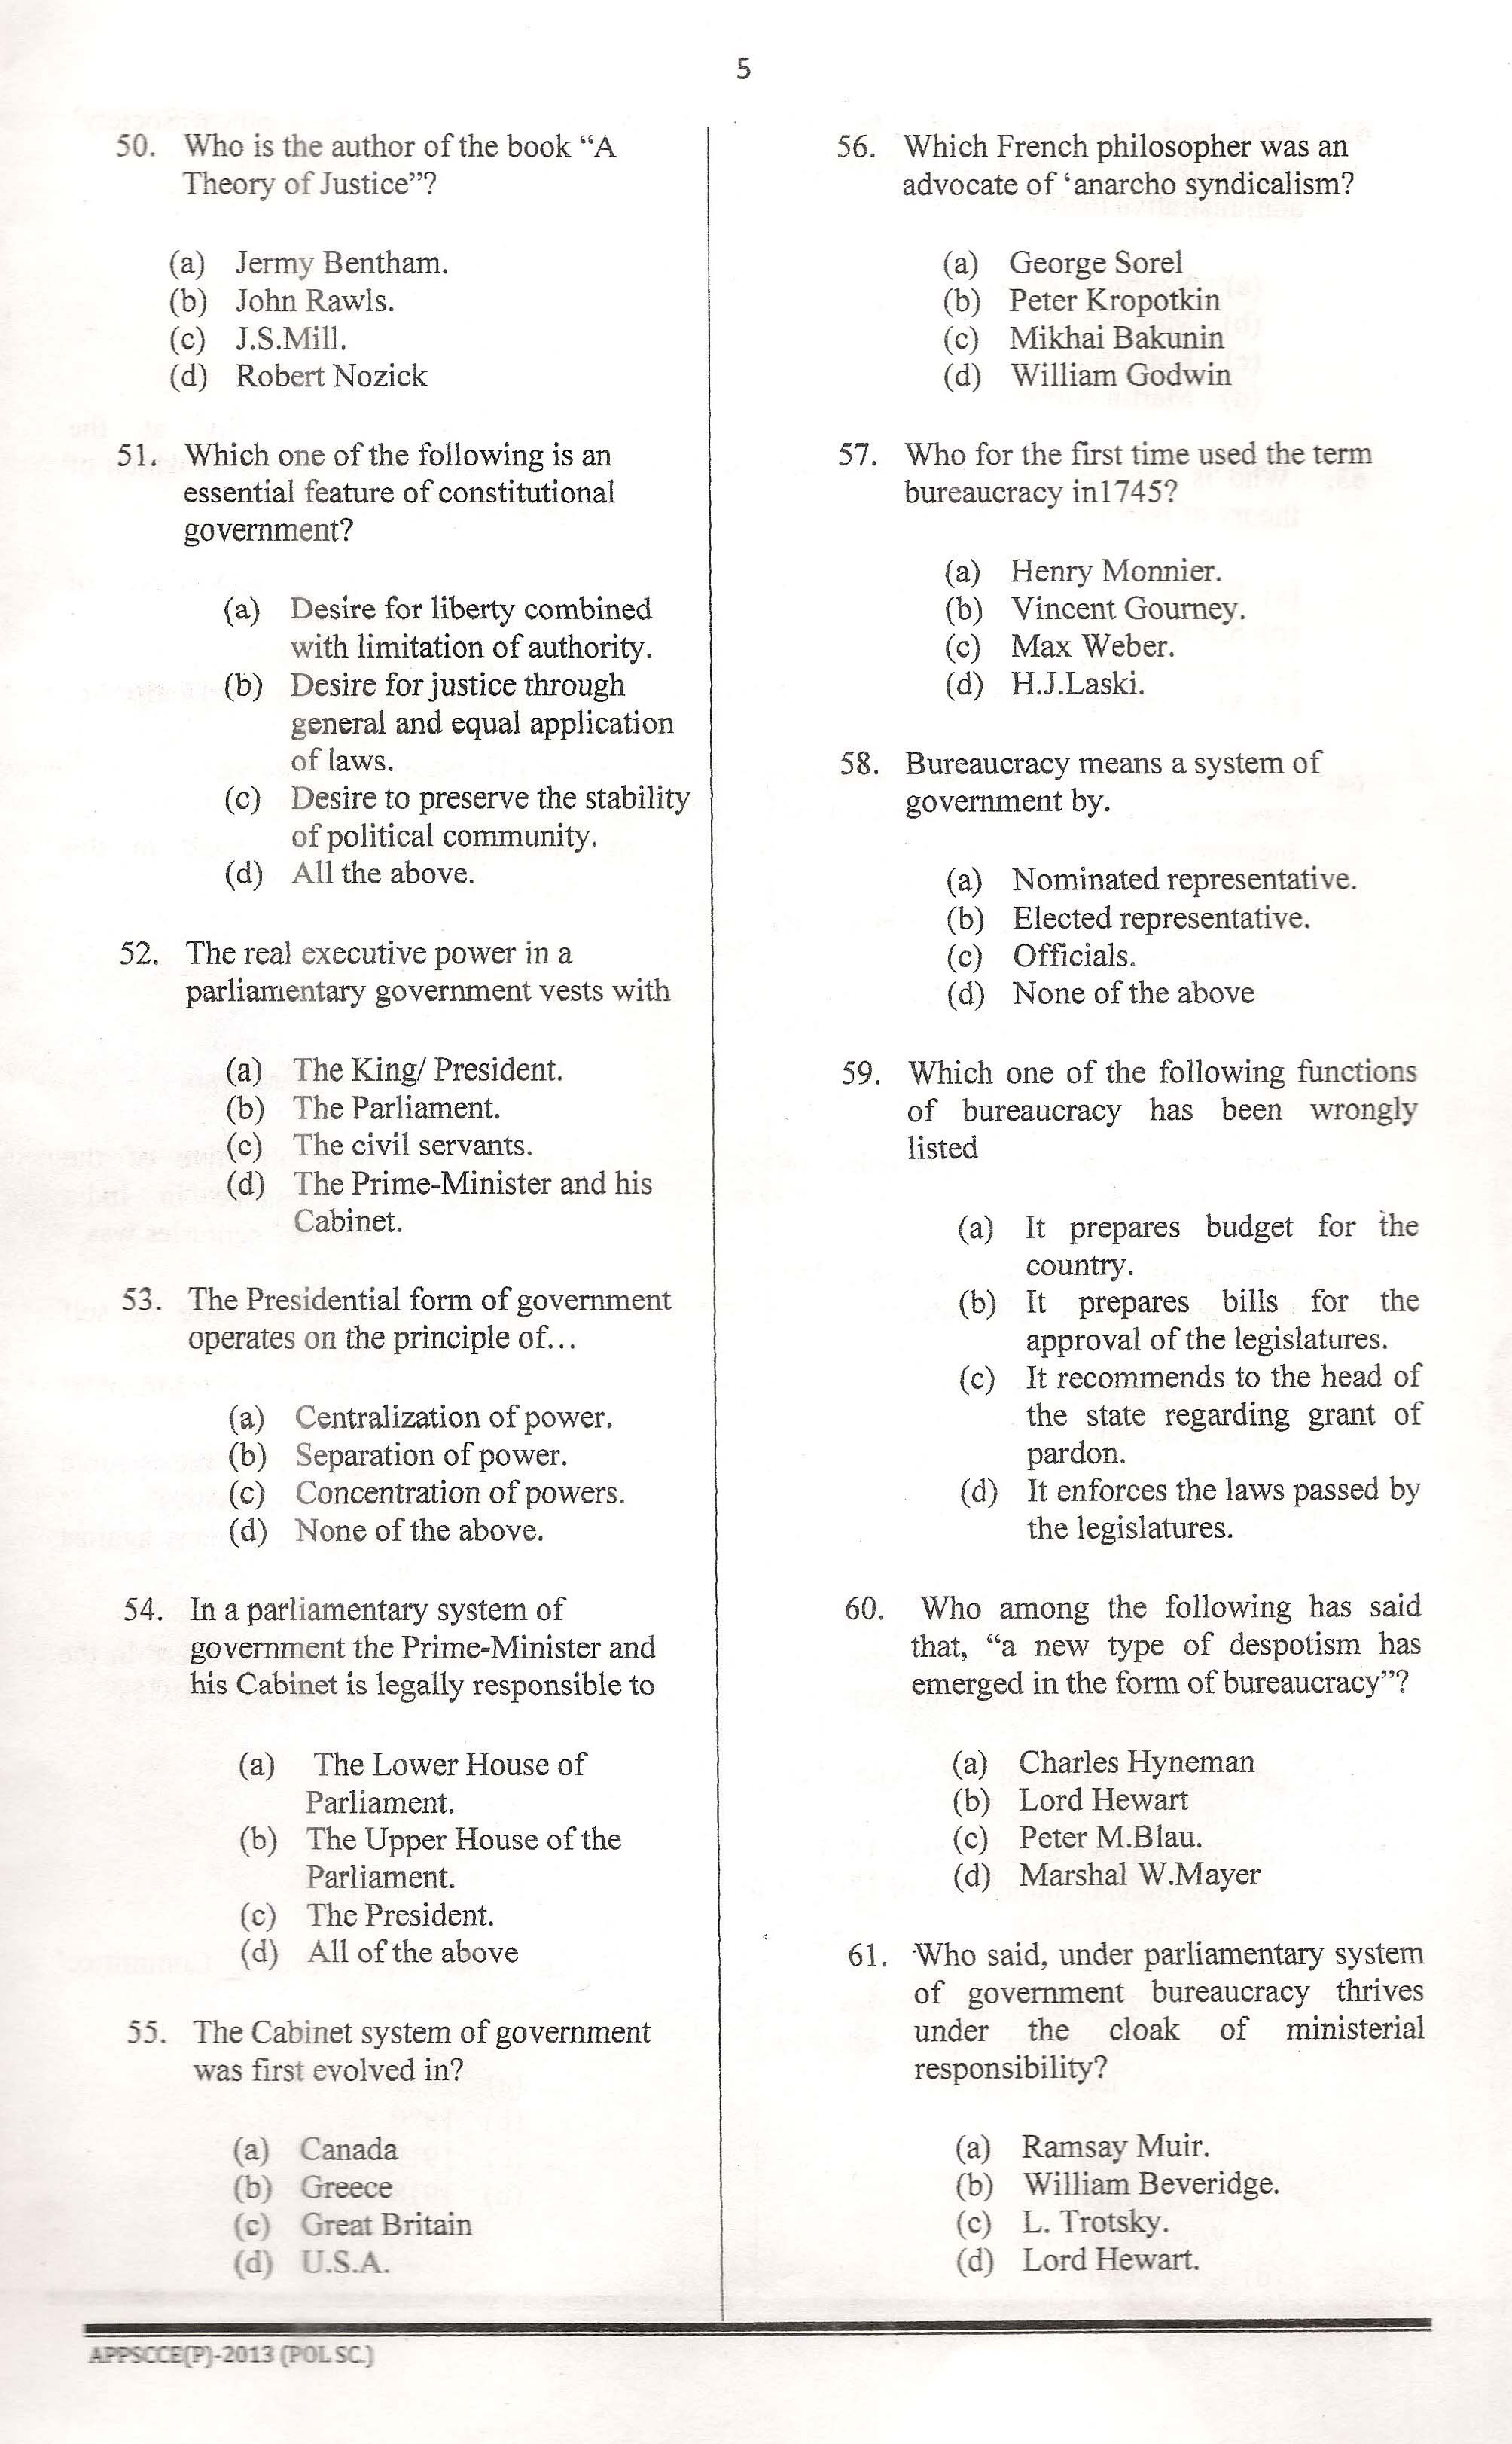 APPSC Combined Competitive Prelims Exam 2013 Political Science 6